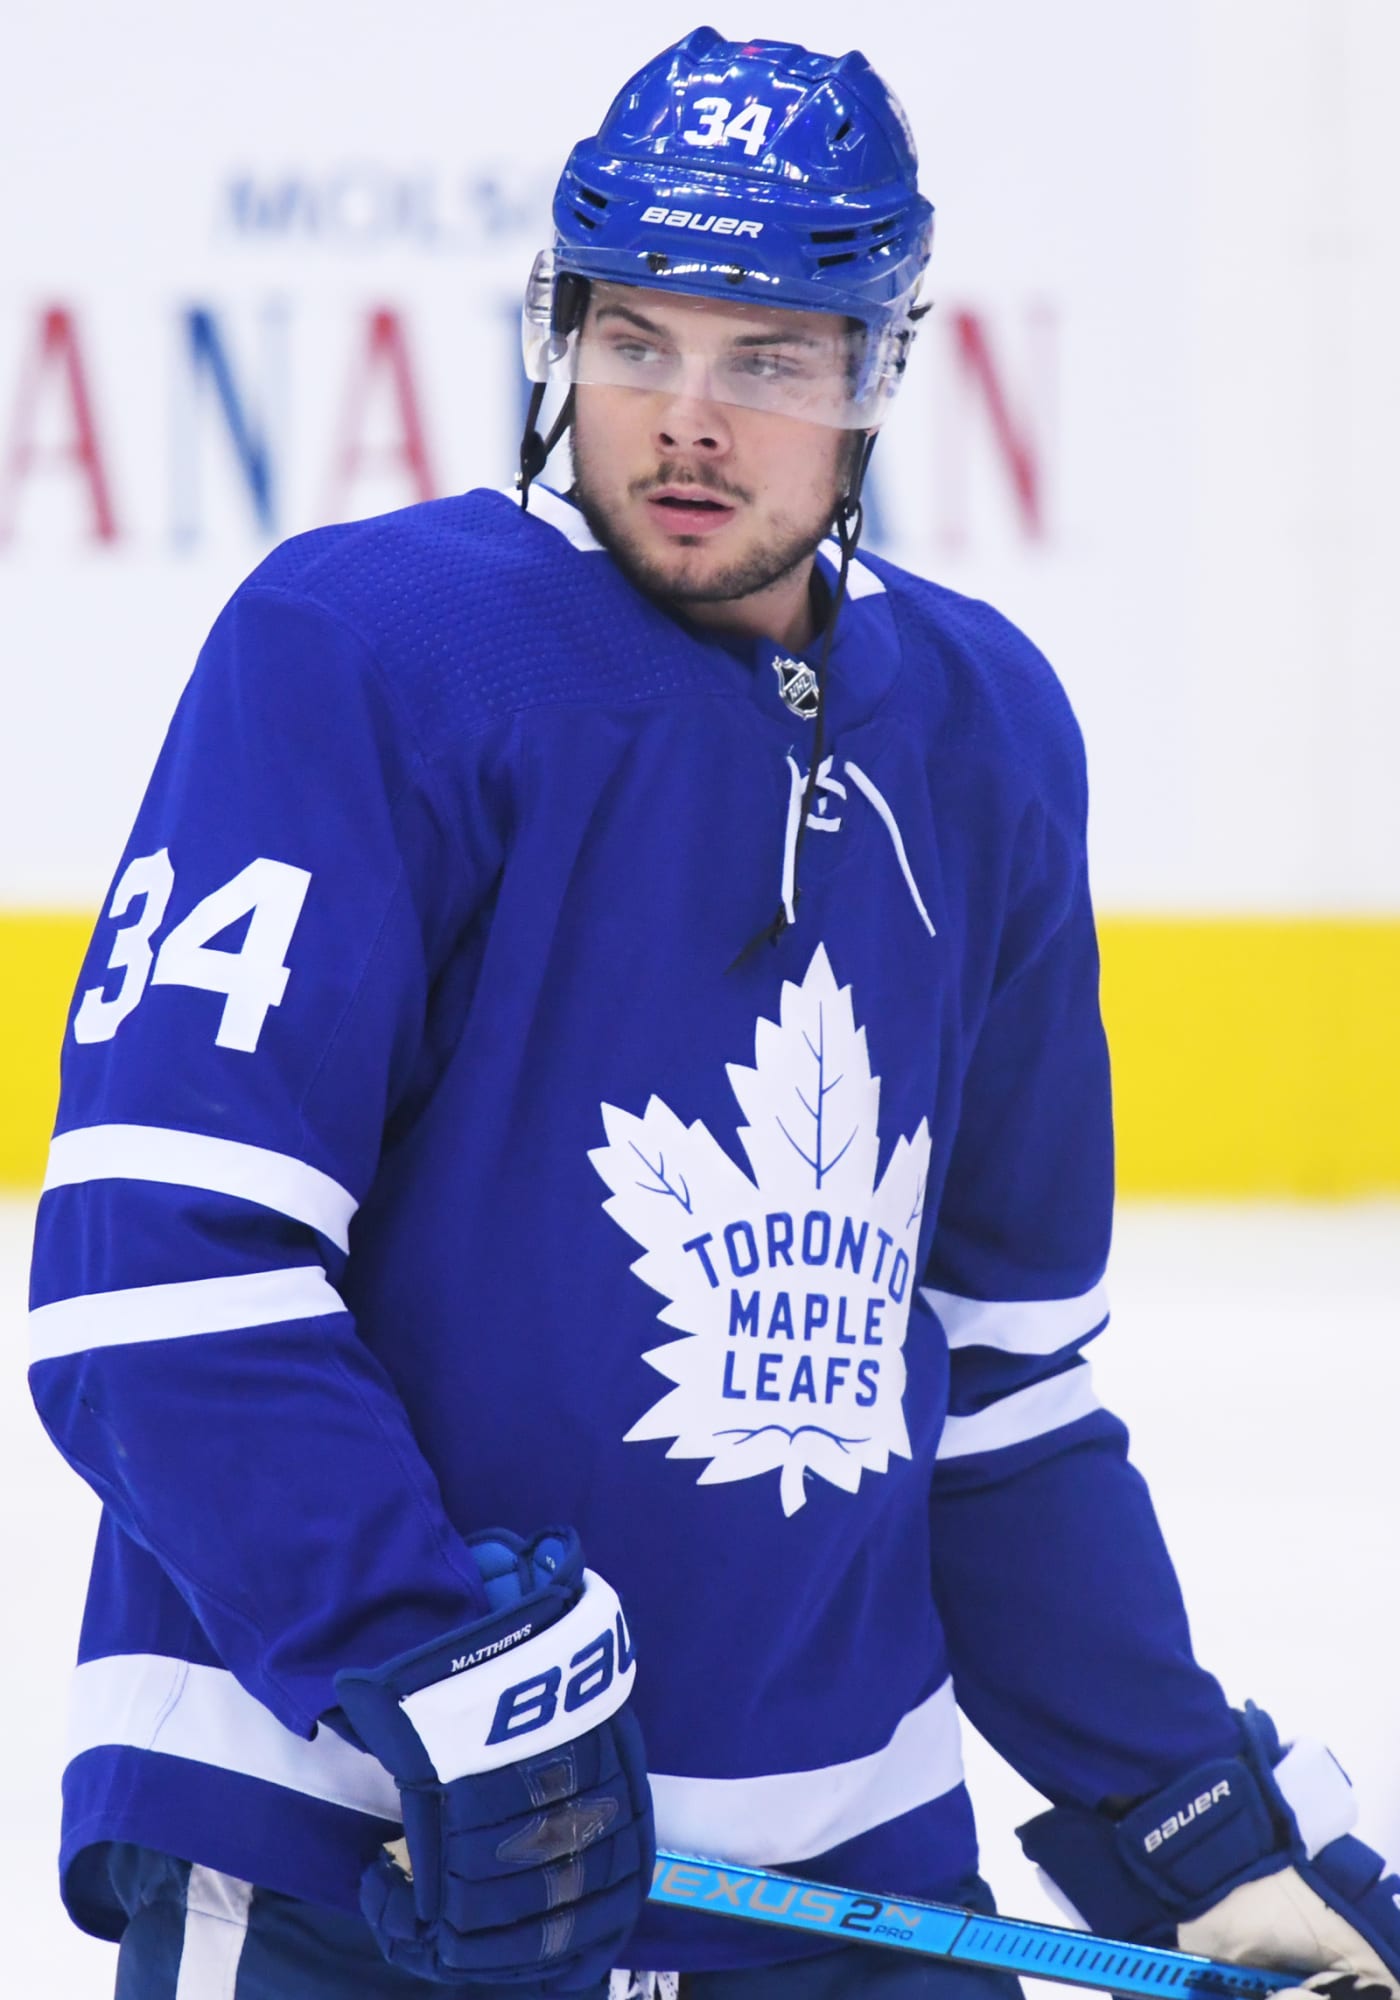 Toronto Maple Leafs Center Auston Matthews in warmups wearing the News  Photo - Getty Images